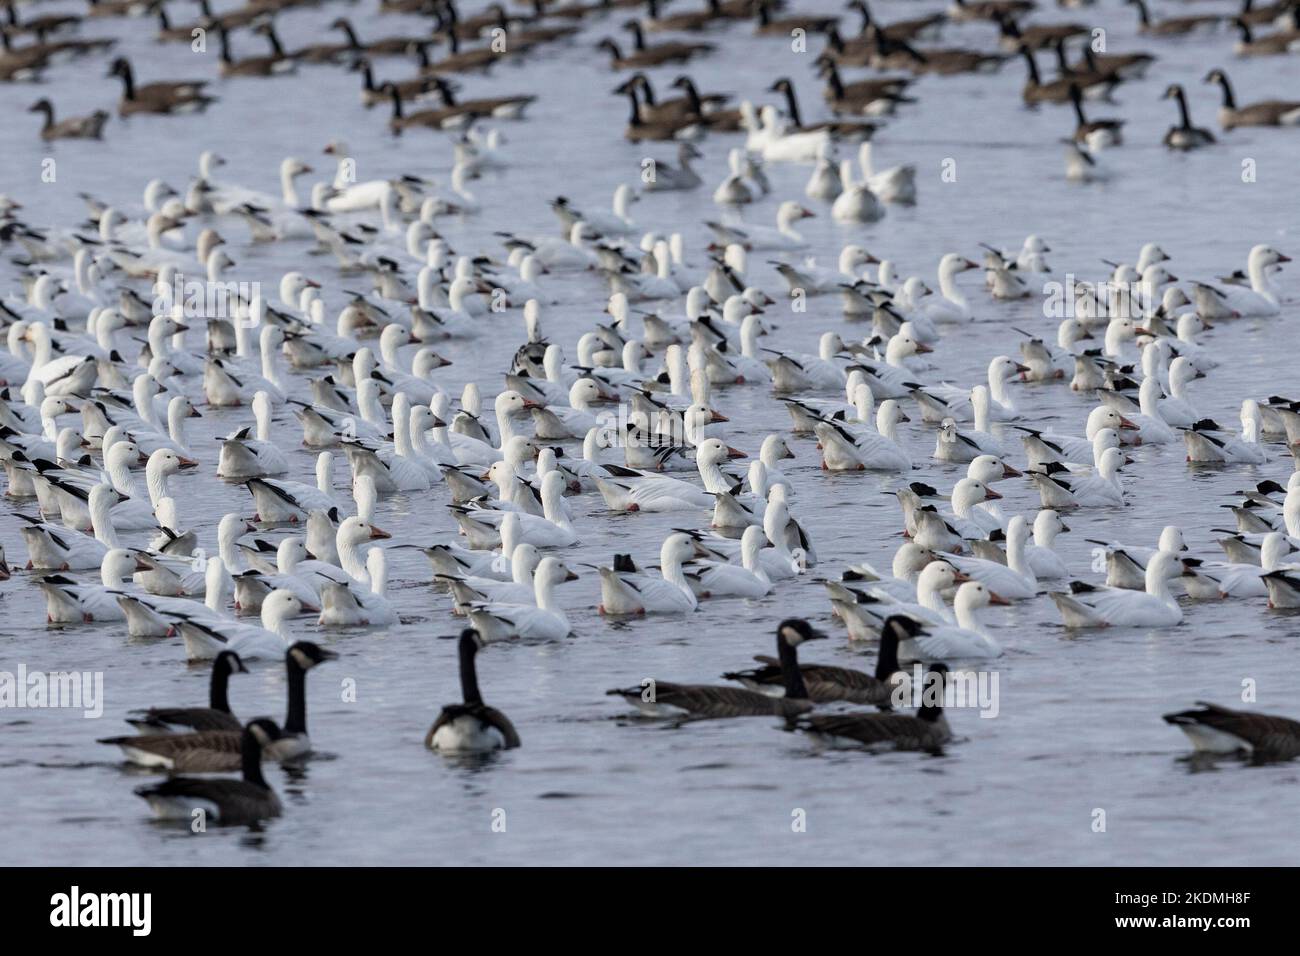 Snow geese migrating from Northern Canada to the New Jersey shore for the winter. Stock Photo